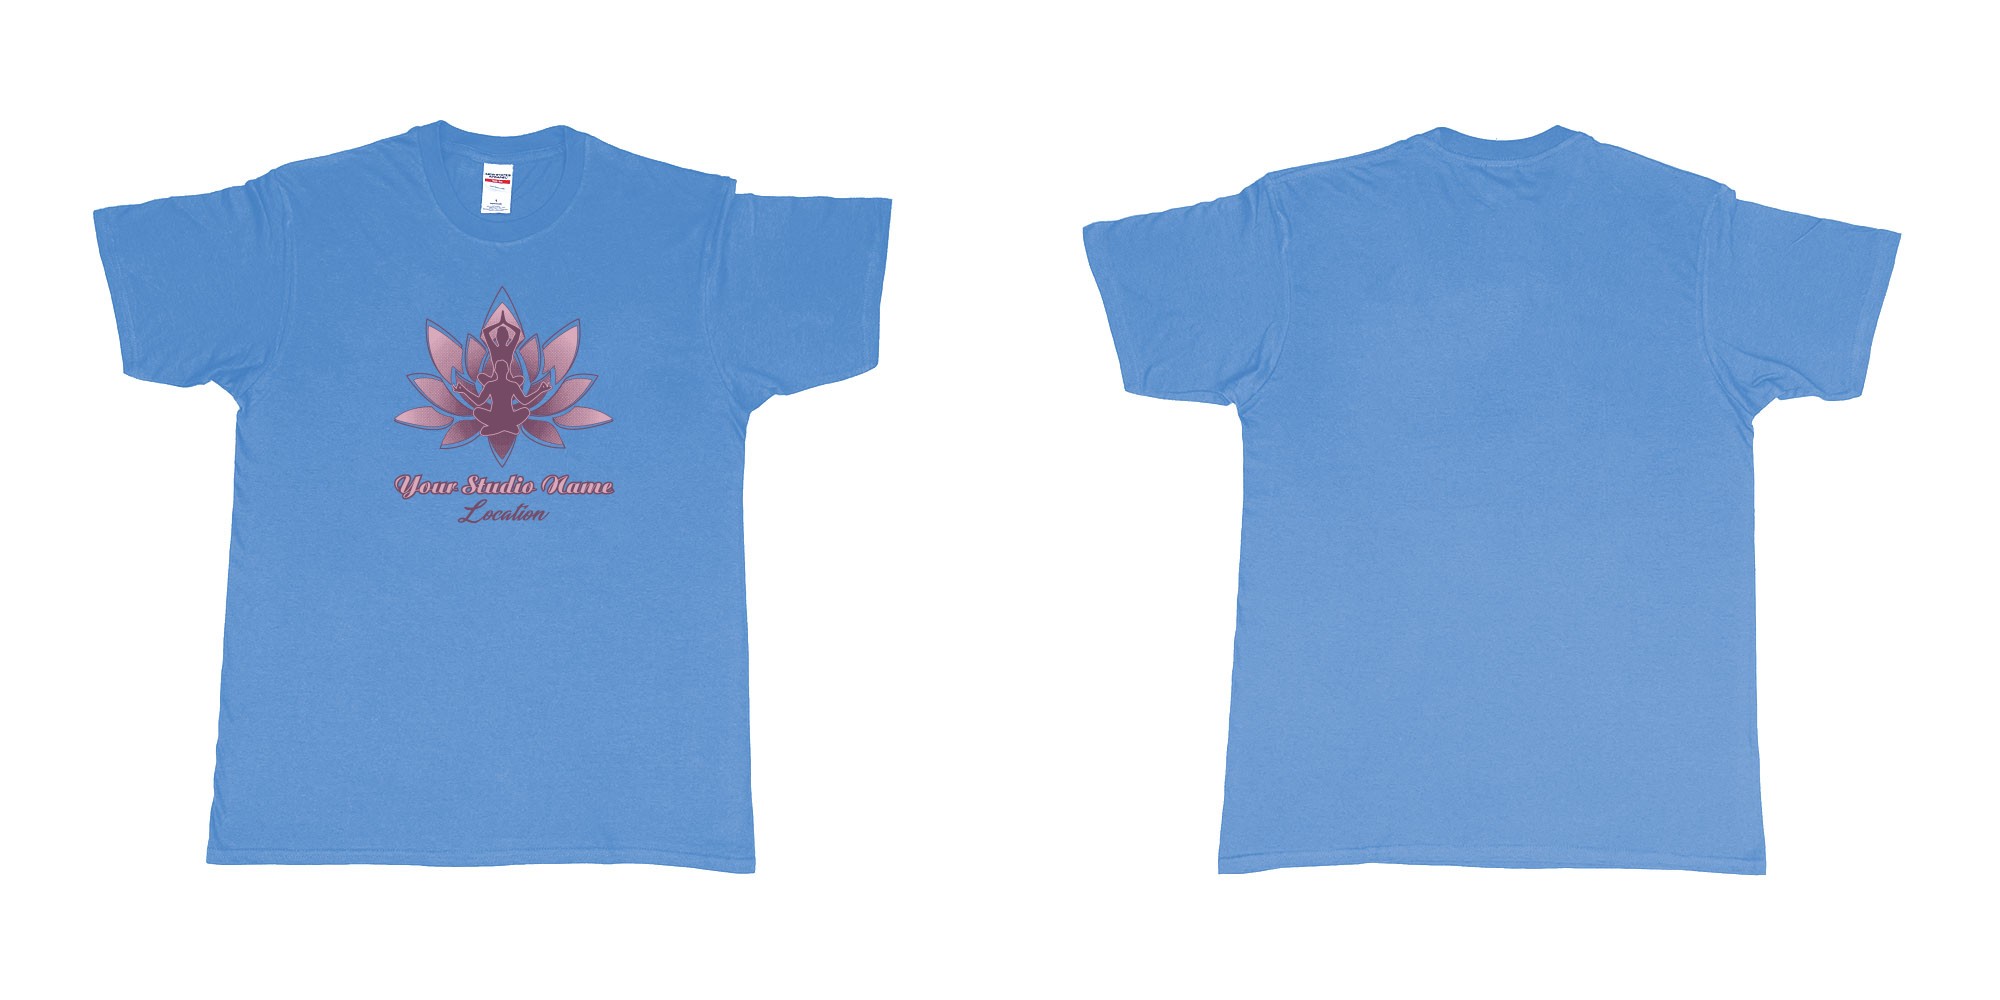 Custom tshirt design yoga meditation lotus own studio t shirt screen printing bali in fabric color carolina-blue choice your own text made in Bali by The Pirate Way